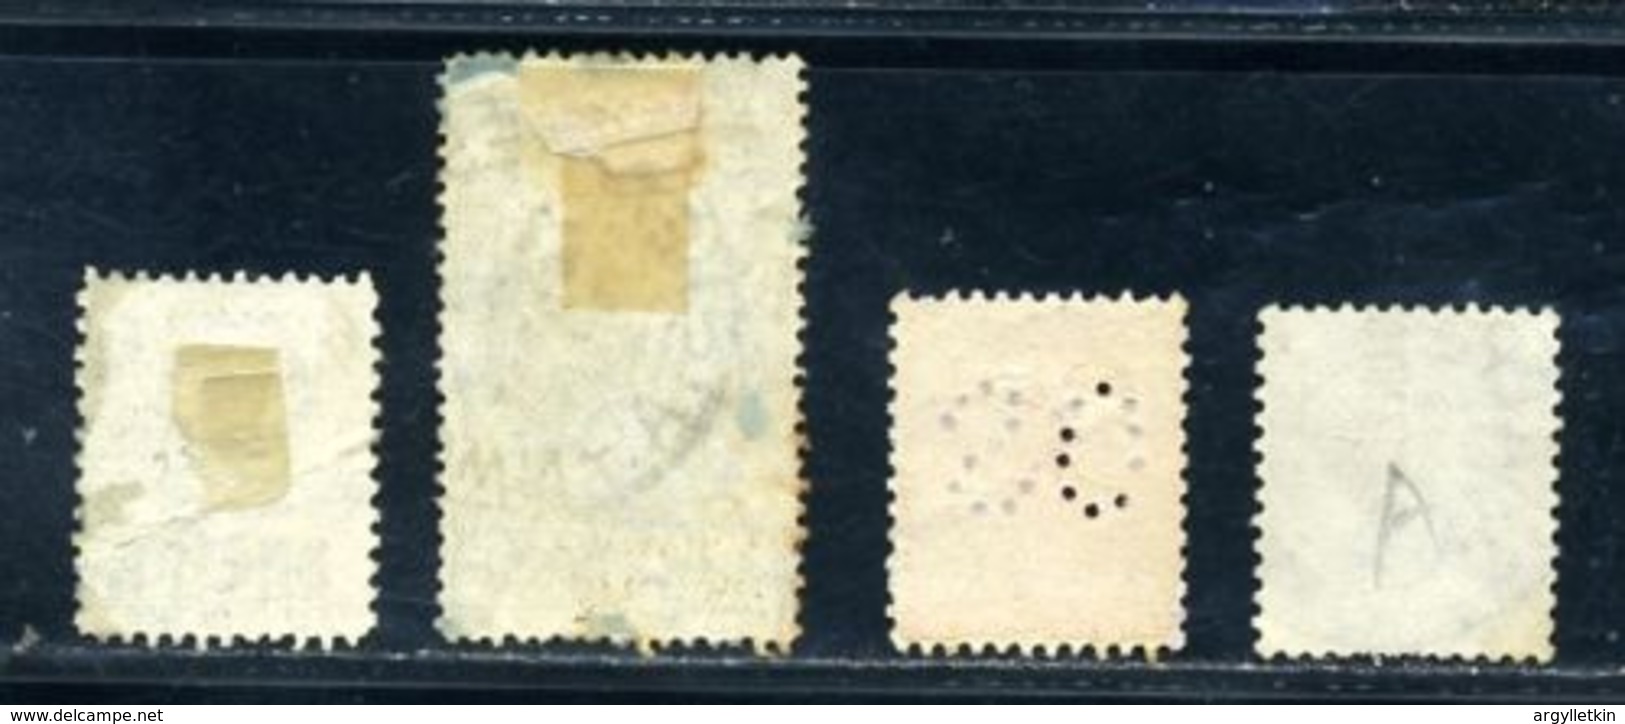 SOUTH AUSTRALIA QV POSTMARKS - Used Stamps